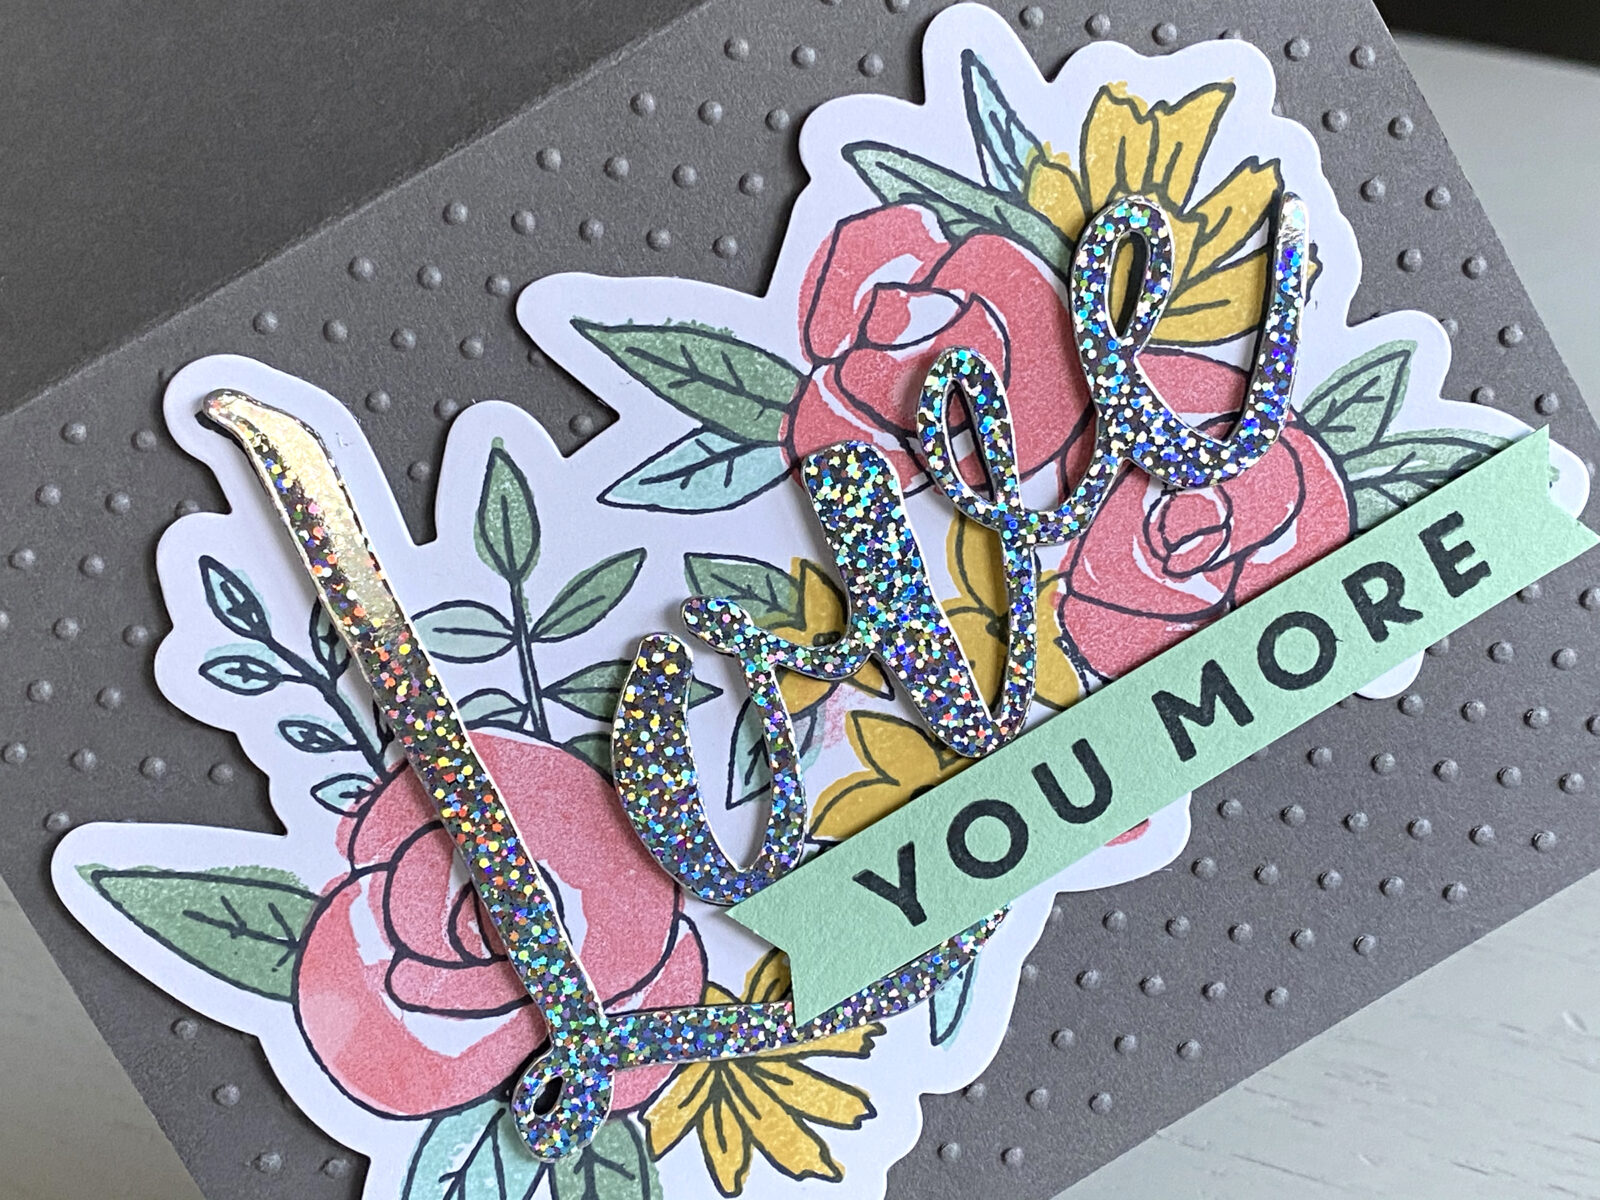 Introducing … Oil Slick Holographic Cardstock – Etc Papers